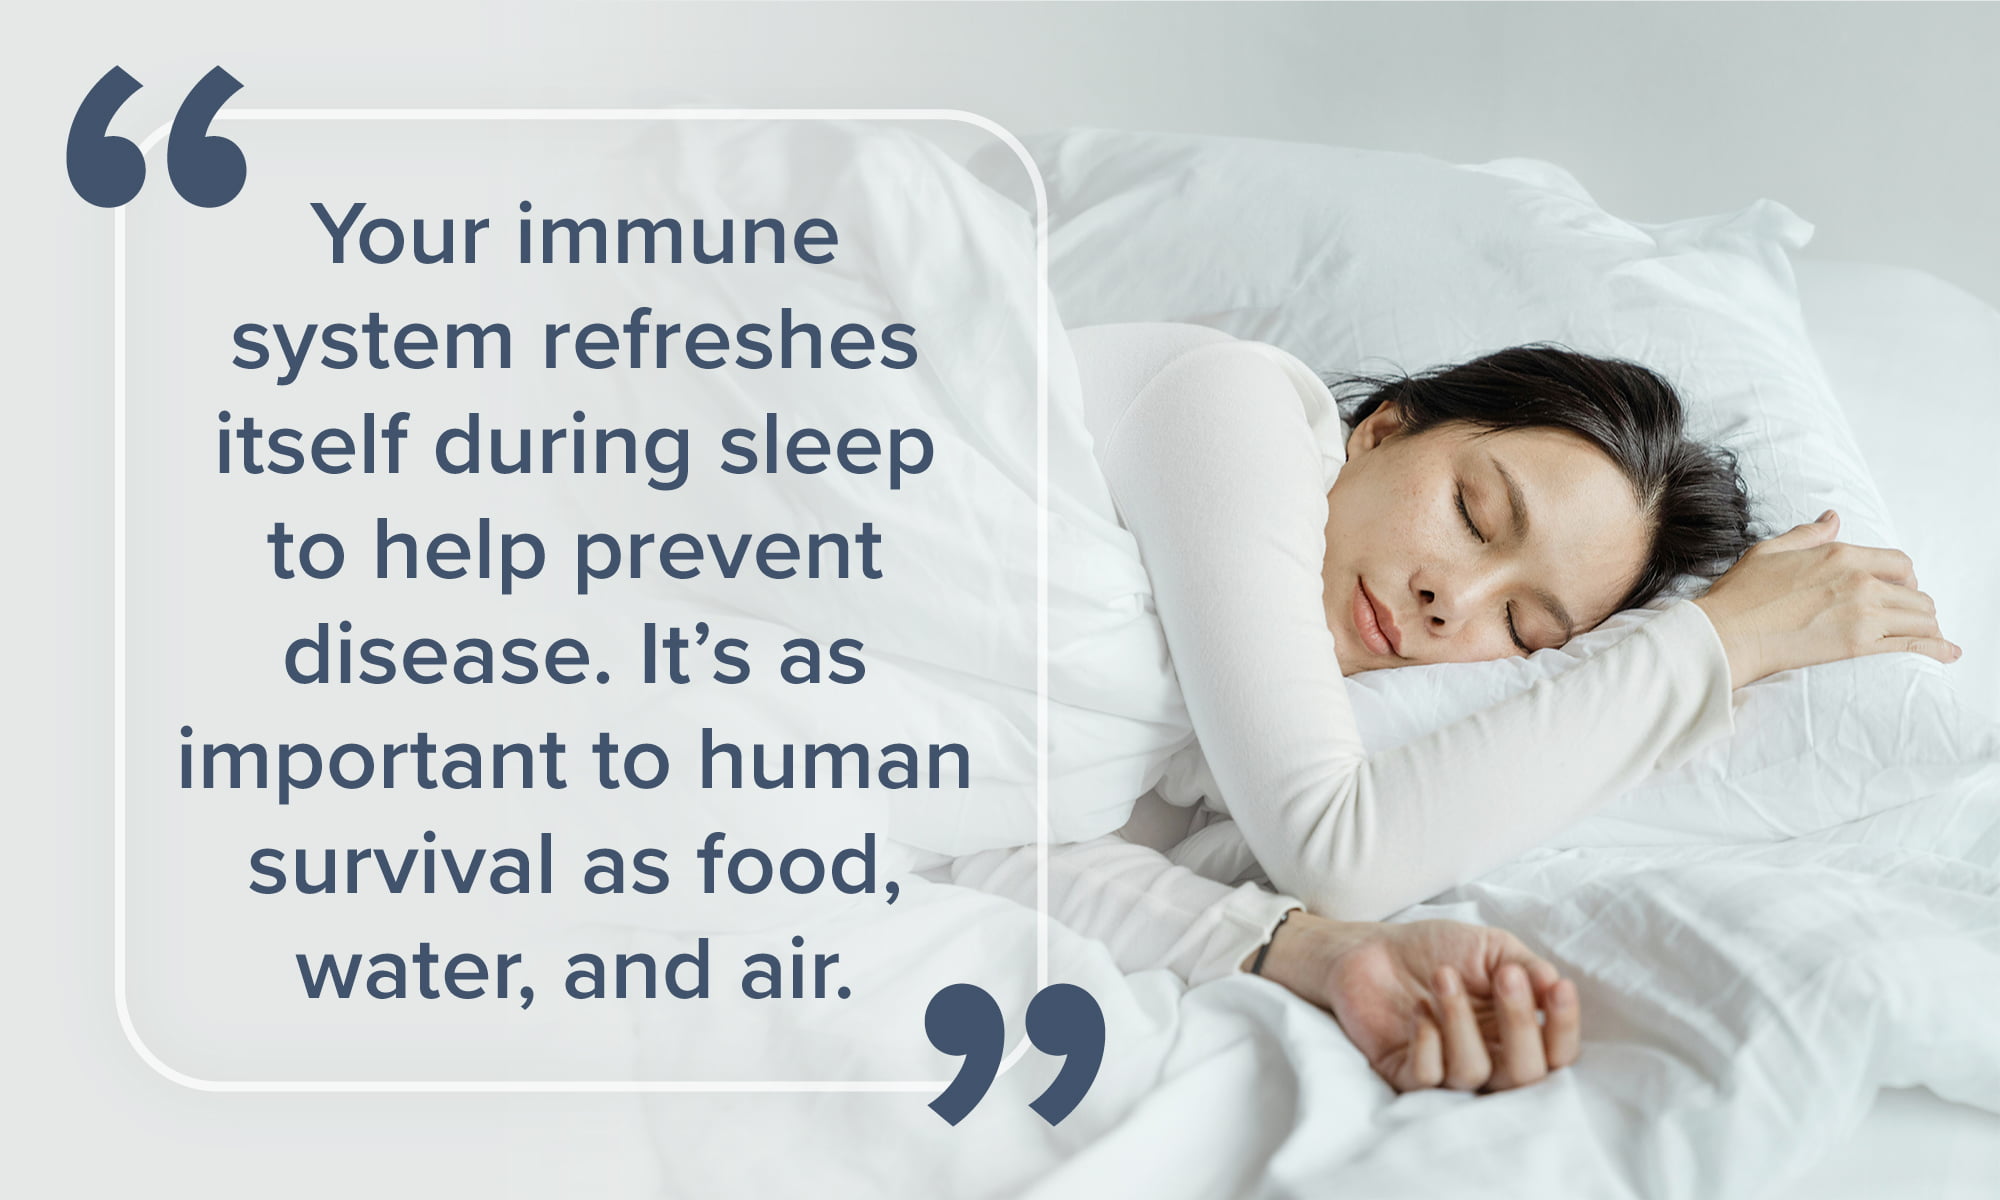 A photo showing a sleeping woman alongside a quote: "Your immune system refreshes itself during sleep to help prevent disease. It’s as important to human survival as food, water, and air."